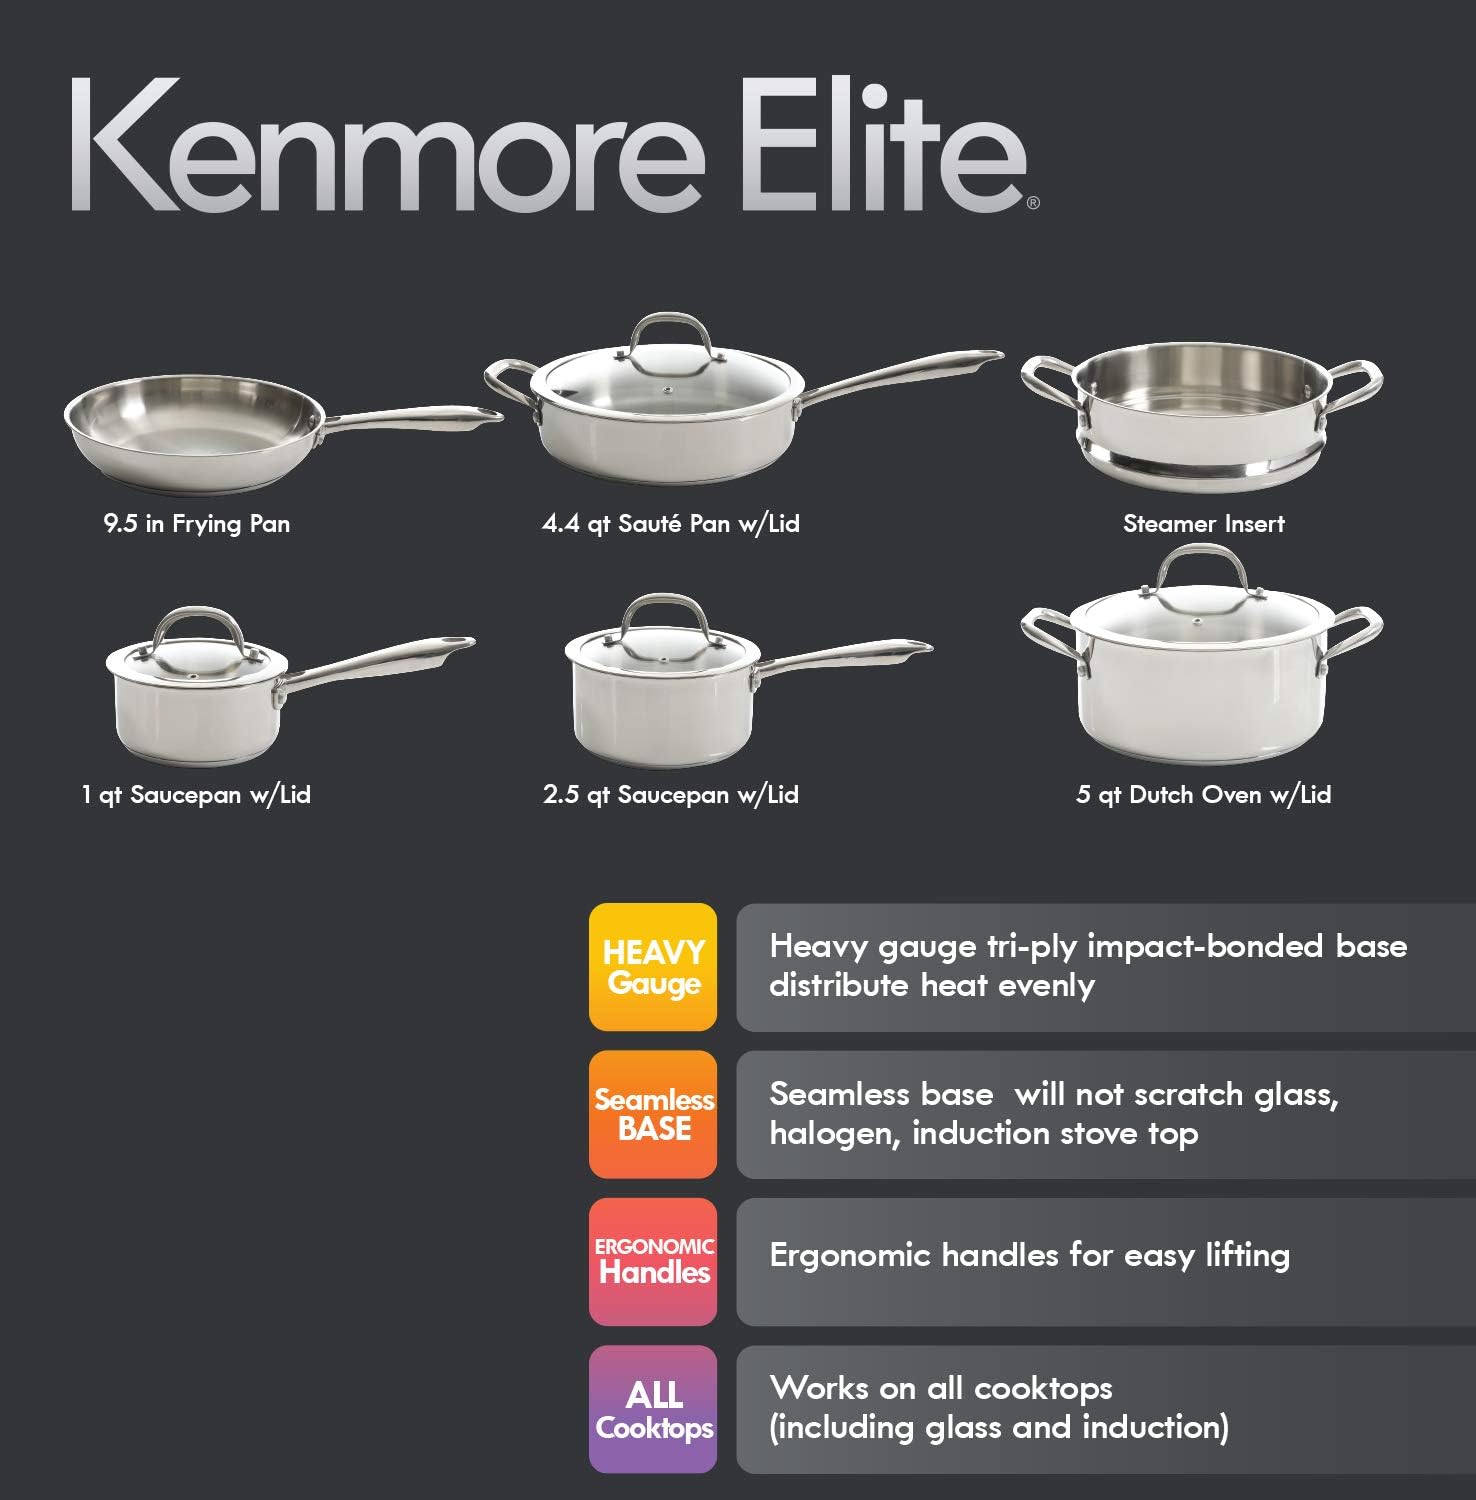 Kenmore Elite Devon Heavy Gauge Stainless Steel Tri-Ply Impact Bonded Induction Cookware Set, 10-Piece